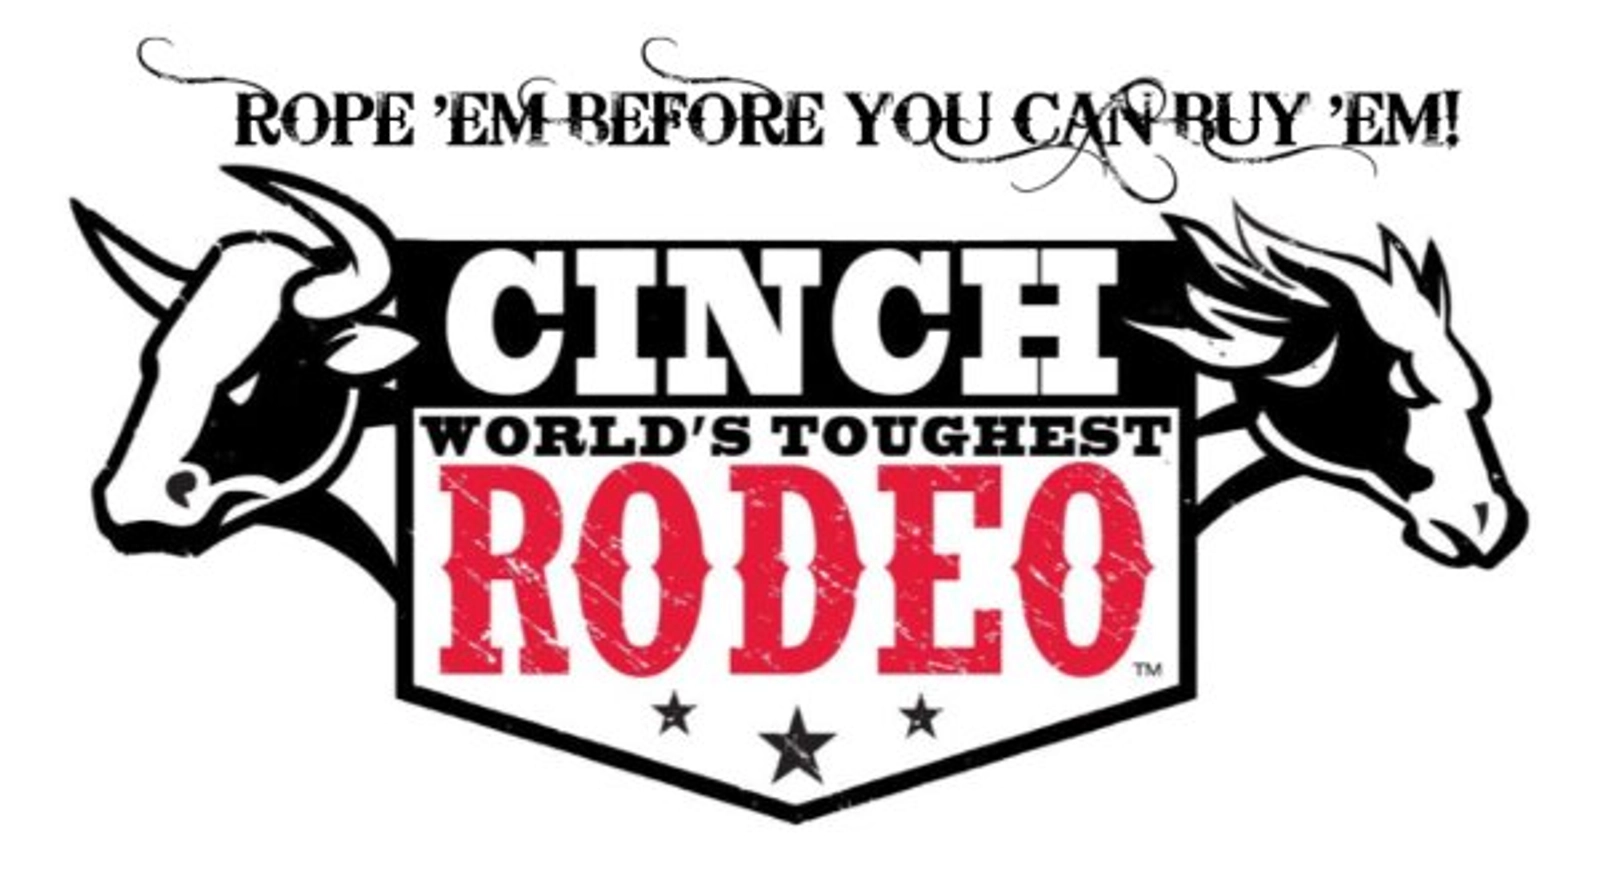 World's Toughest Rodeo Tickets - Rope 'em Before You Can Buy 'em! - Thumbnail Image